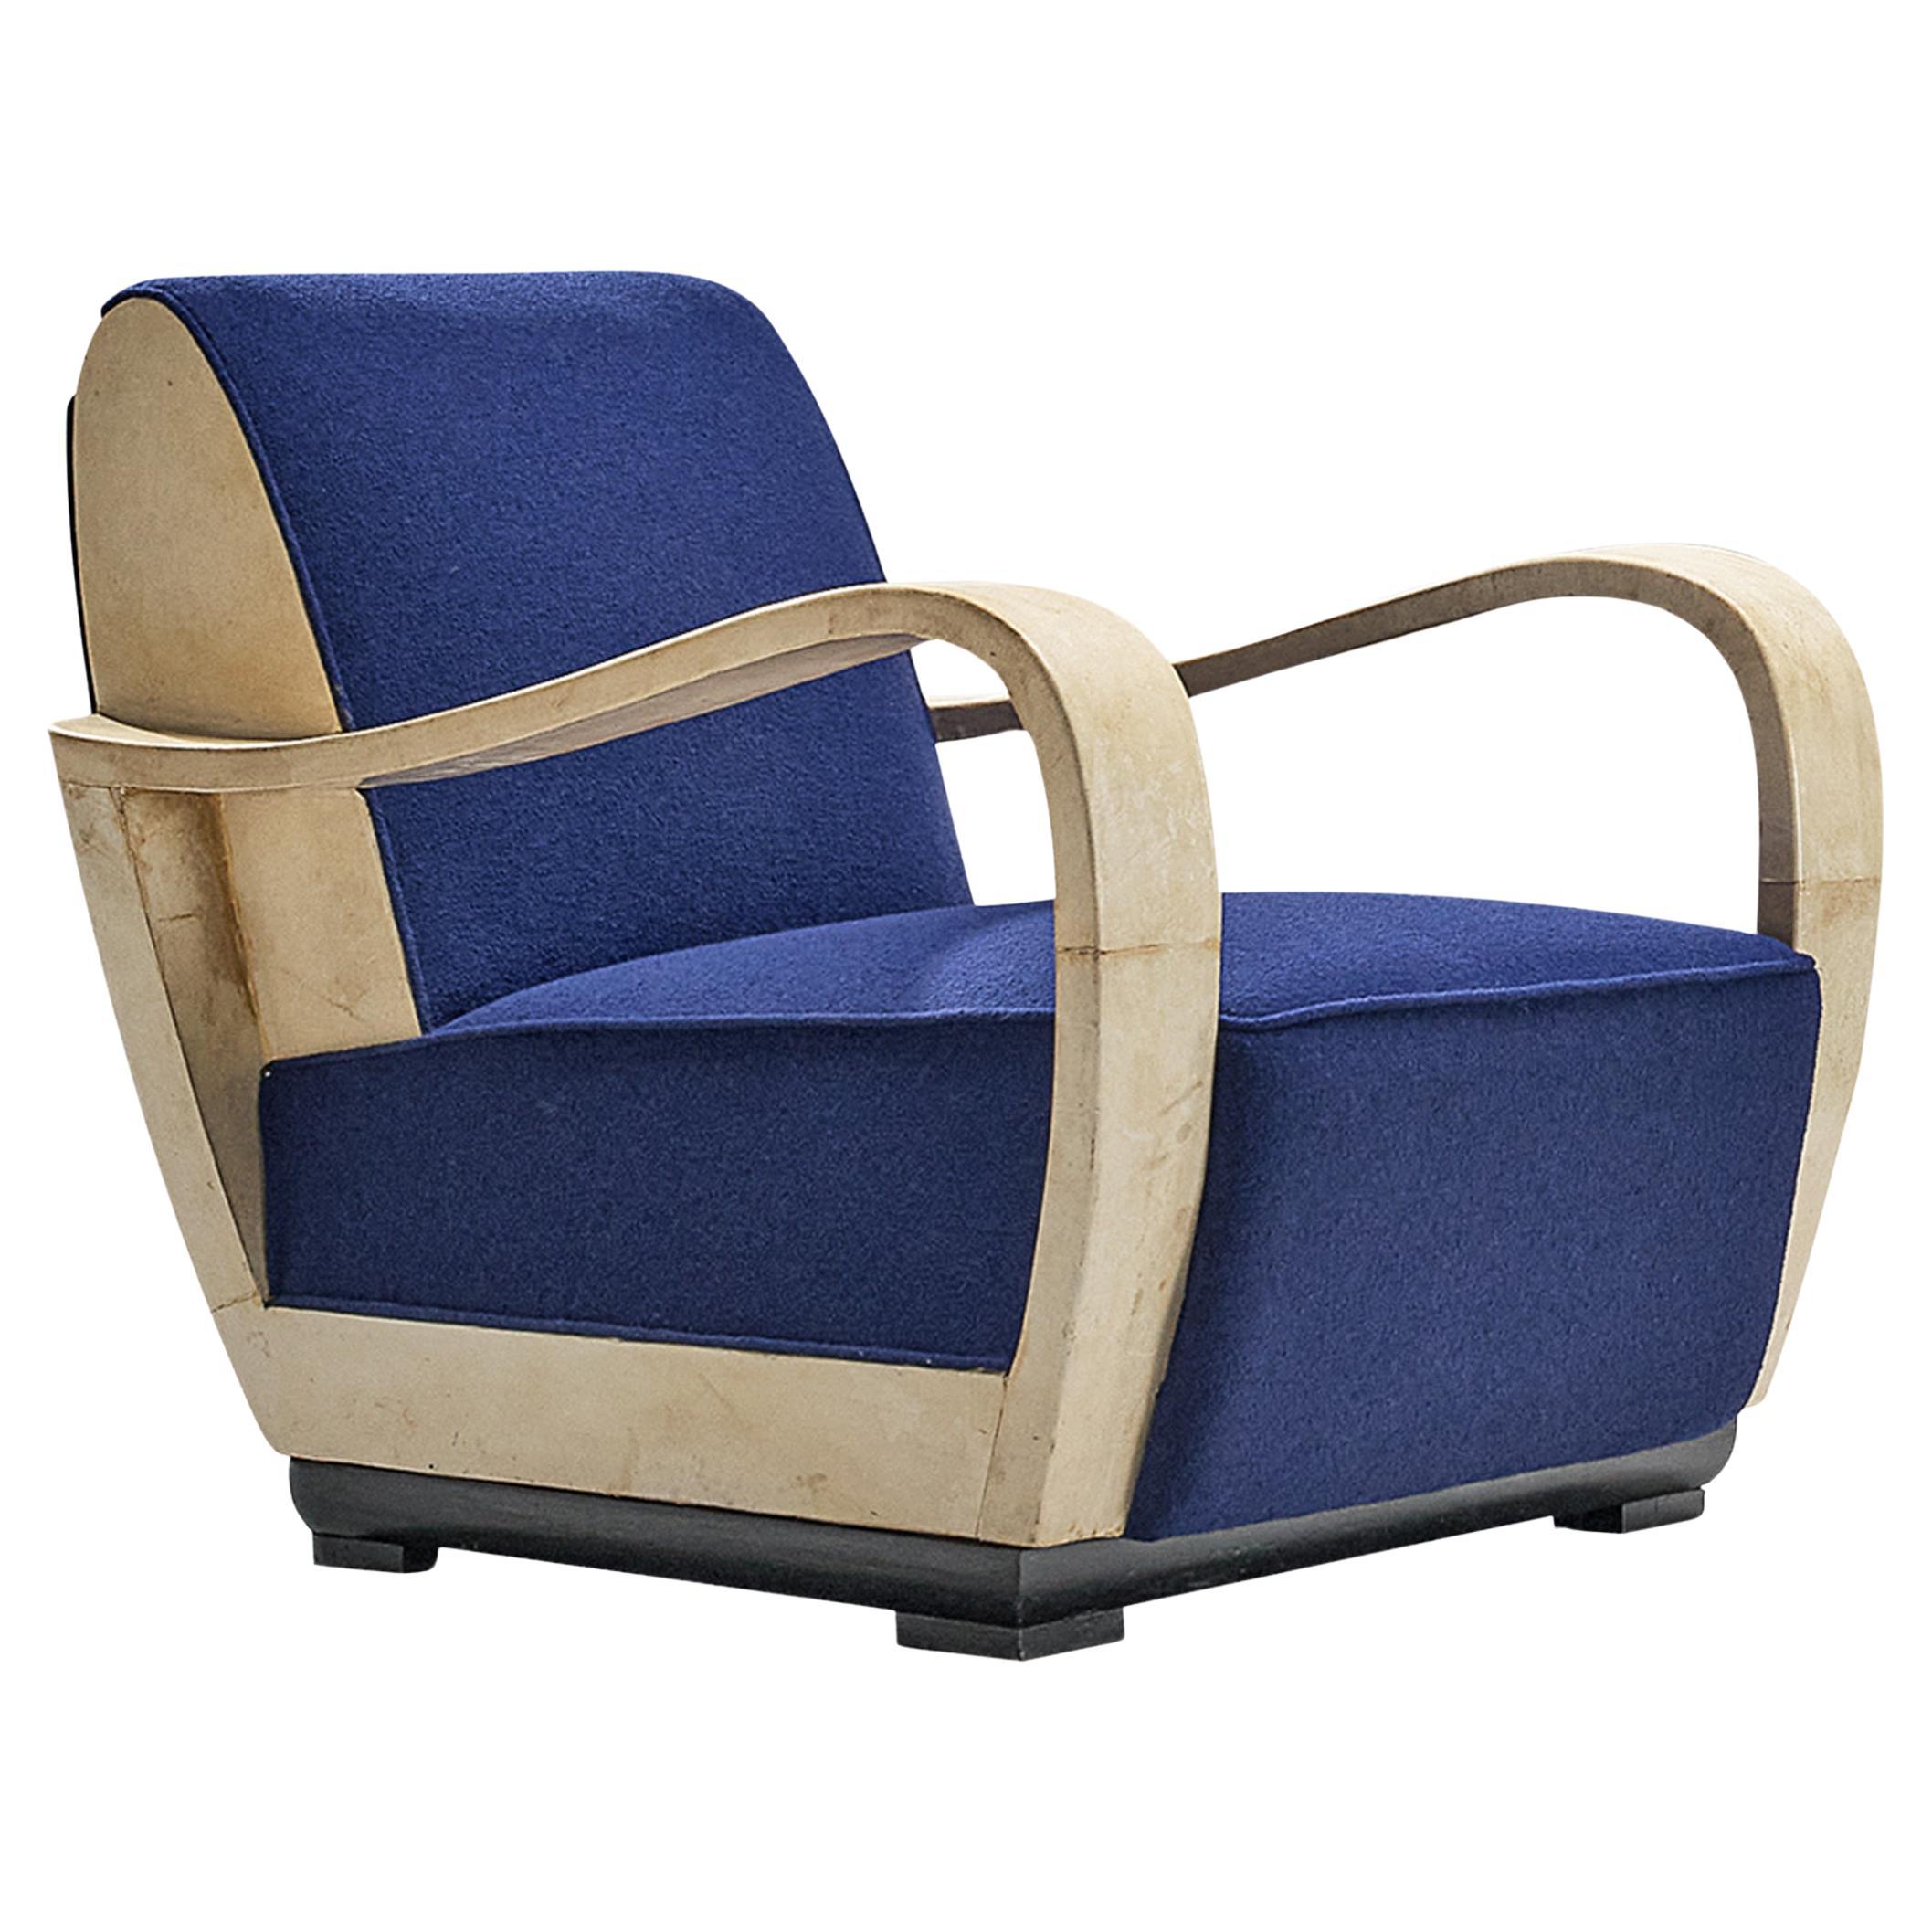 Unique Valzania Lounge Chair in Parchment and Blue Upholstery 